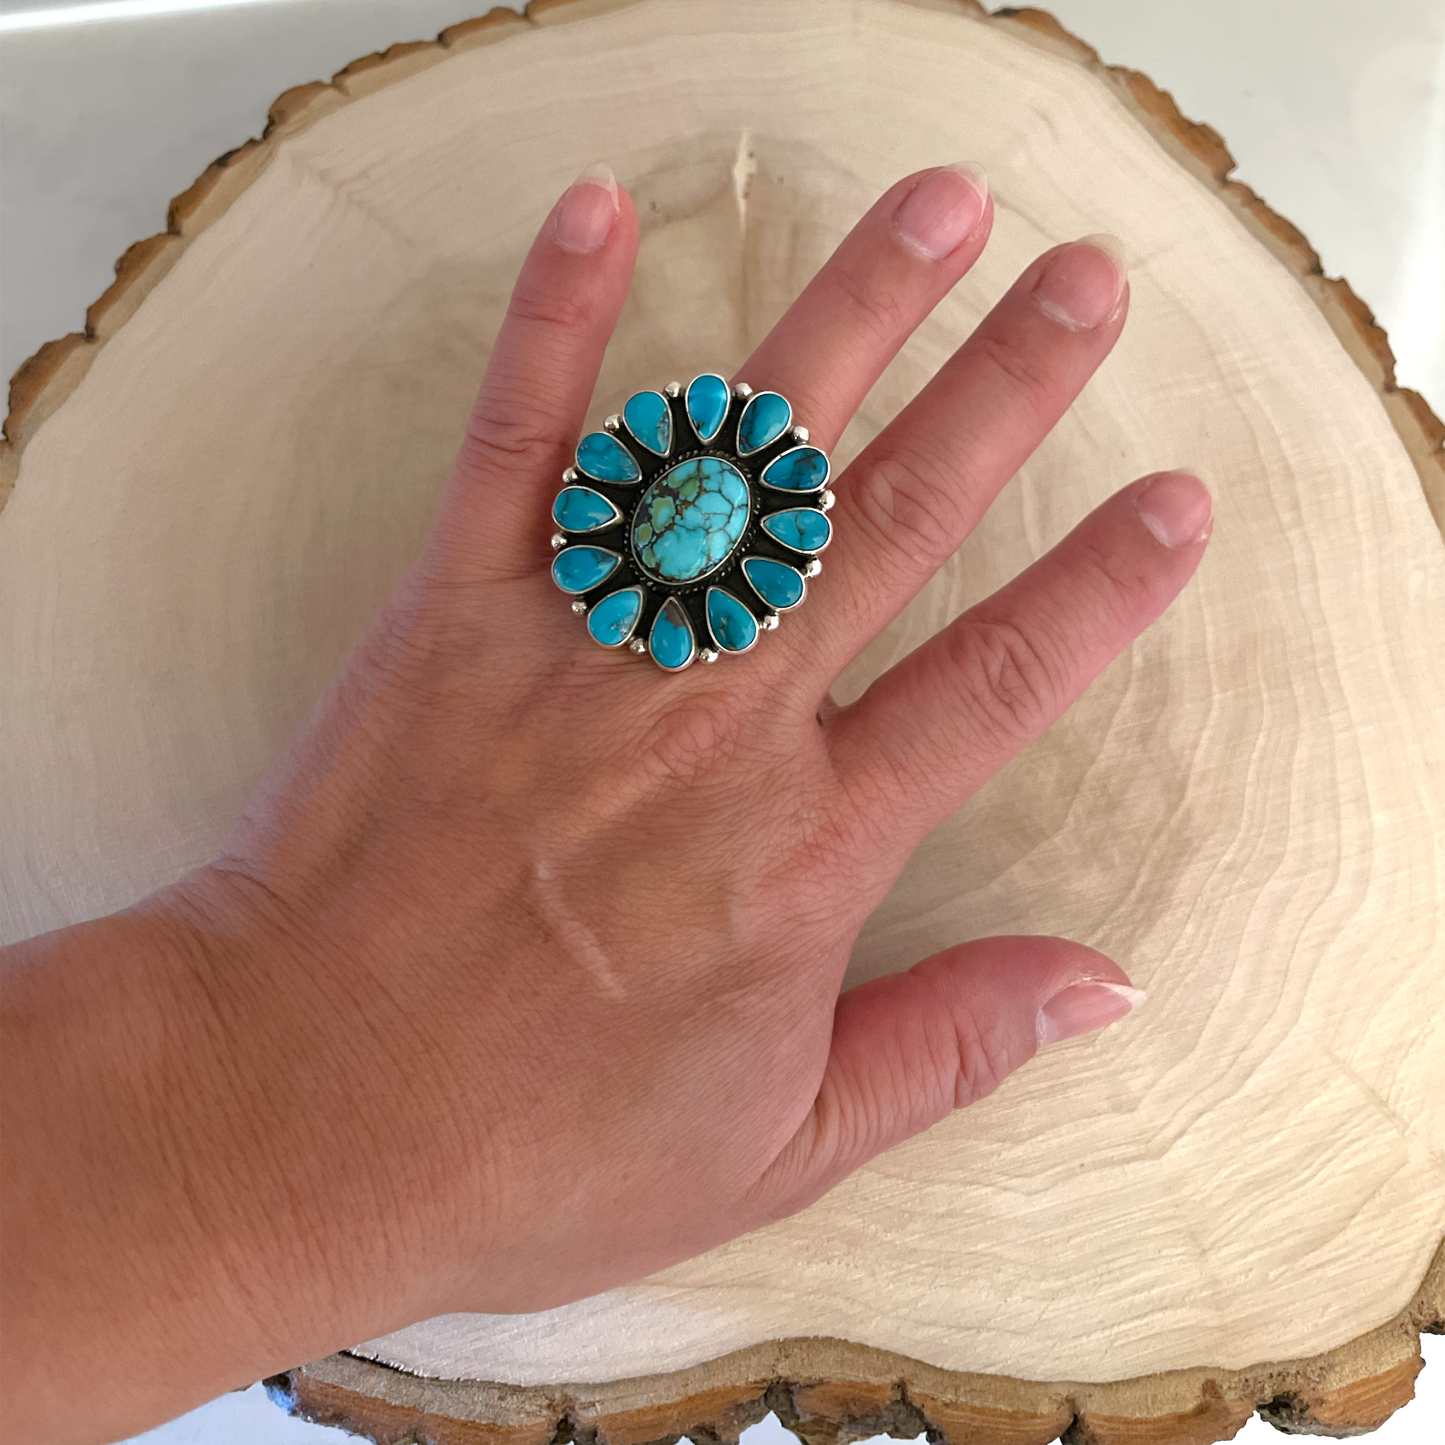 Turquoise Cluster Ring Size 6.5 By Darrell Cadman